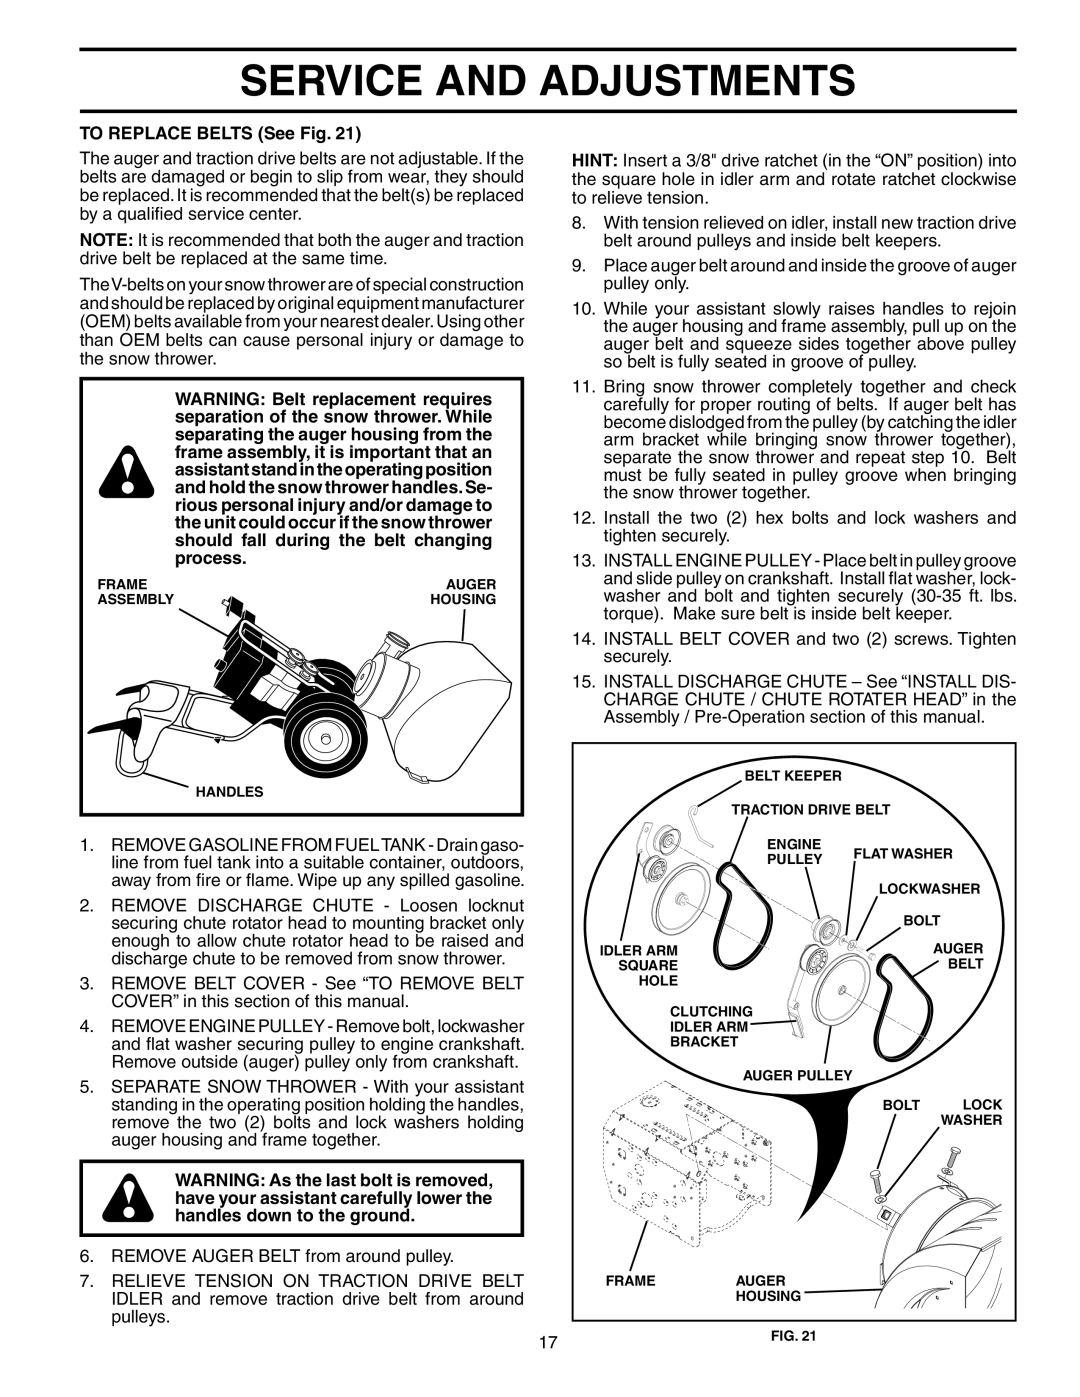 Husqvarna 524STE owner manual To Replace Belts See Fig 